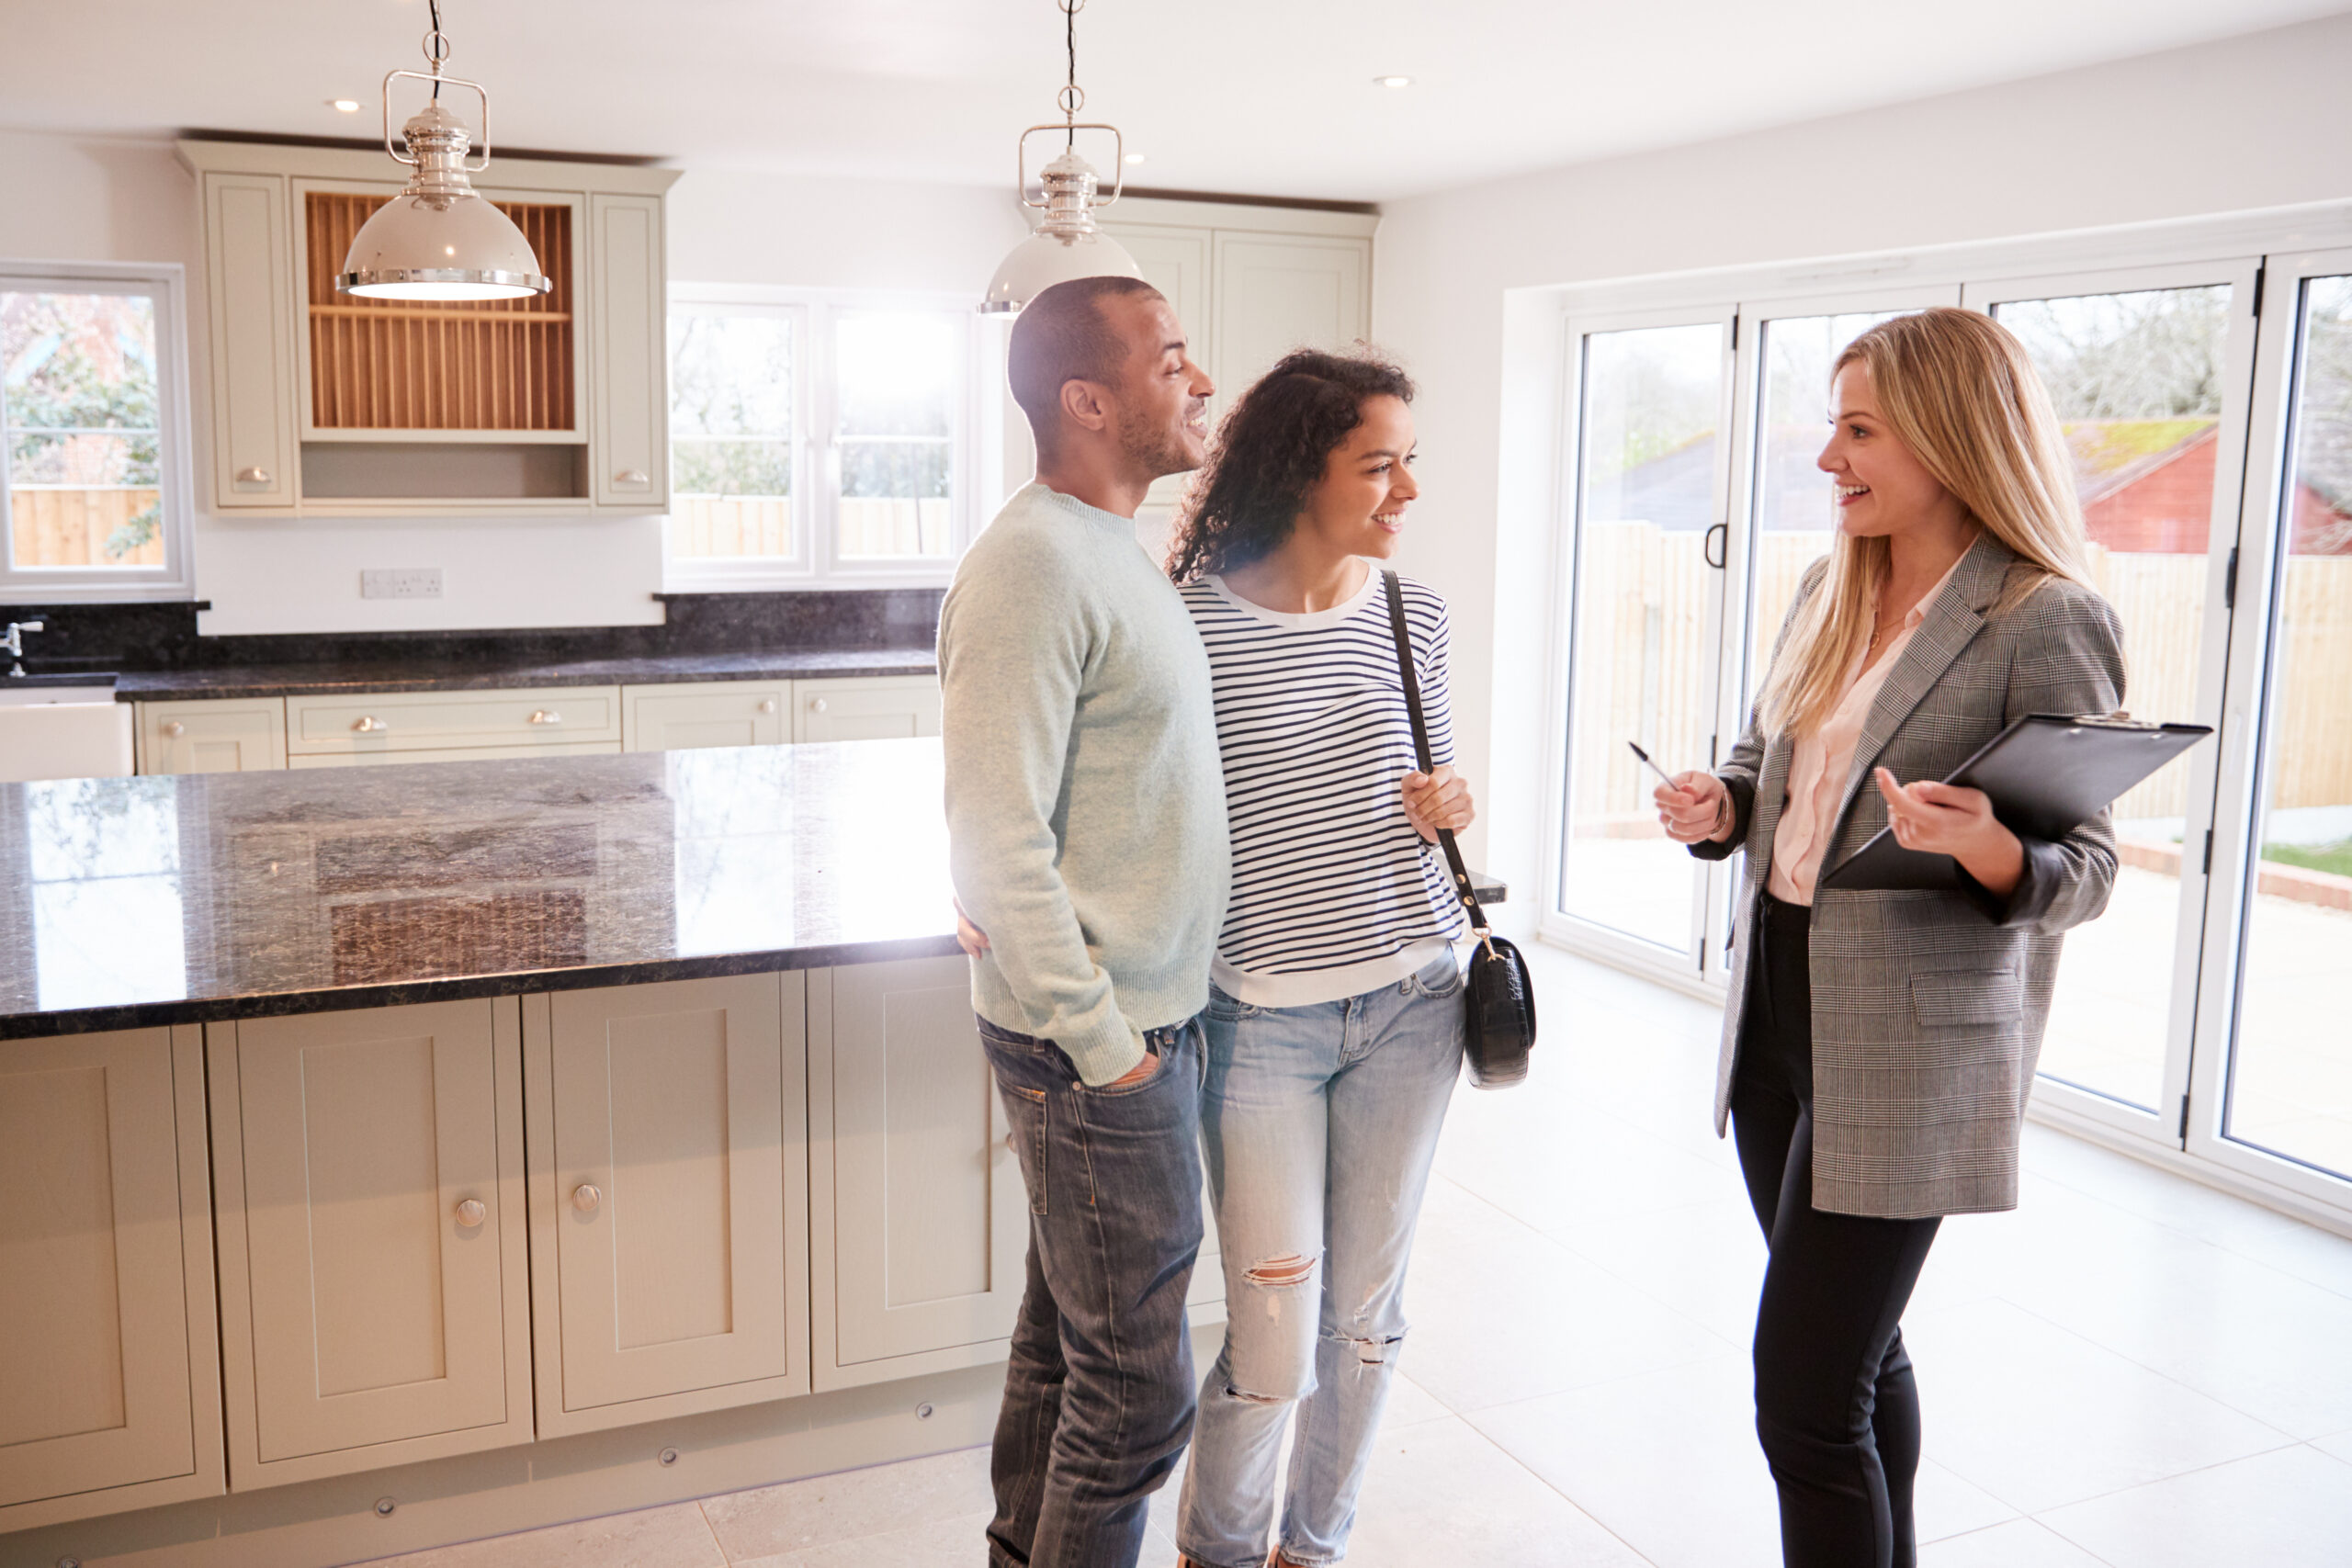 A young couple (man and woman) are speaking to a woman REALTOR in the kitchen area of a home. There is a kitchen island and sliding glass doors providing bright lighting in the room.